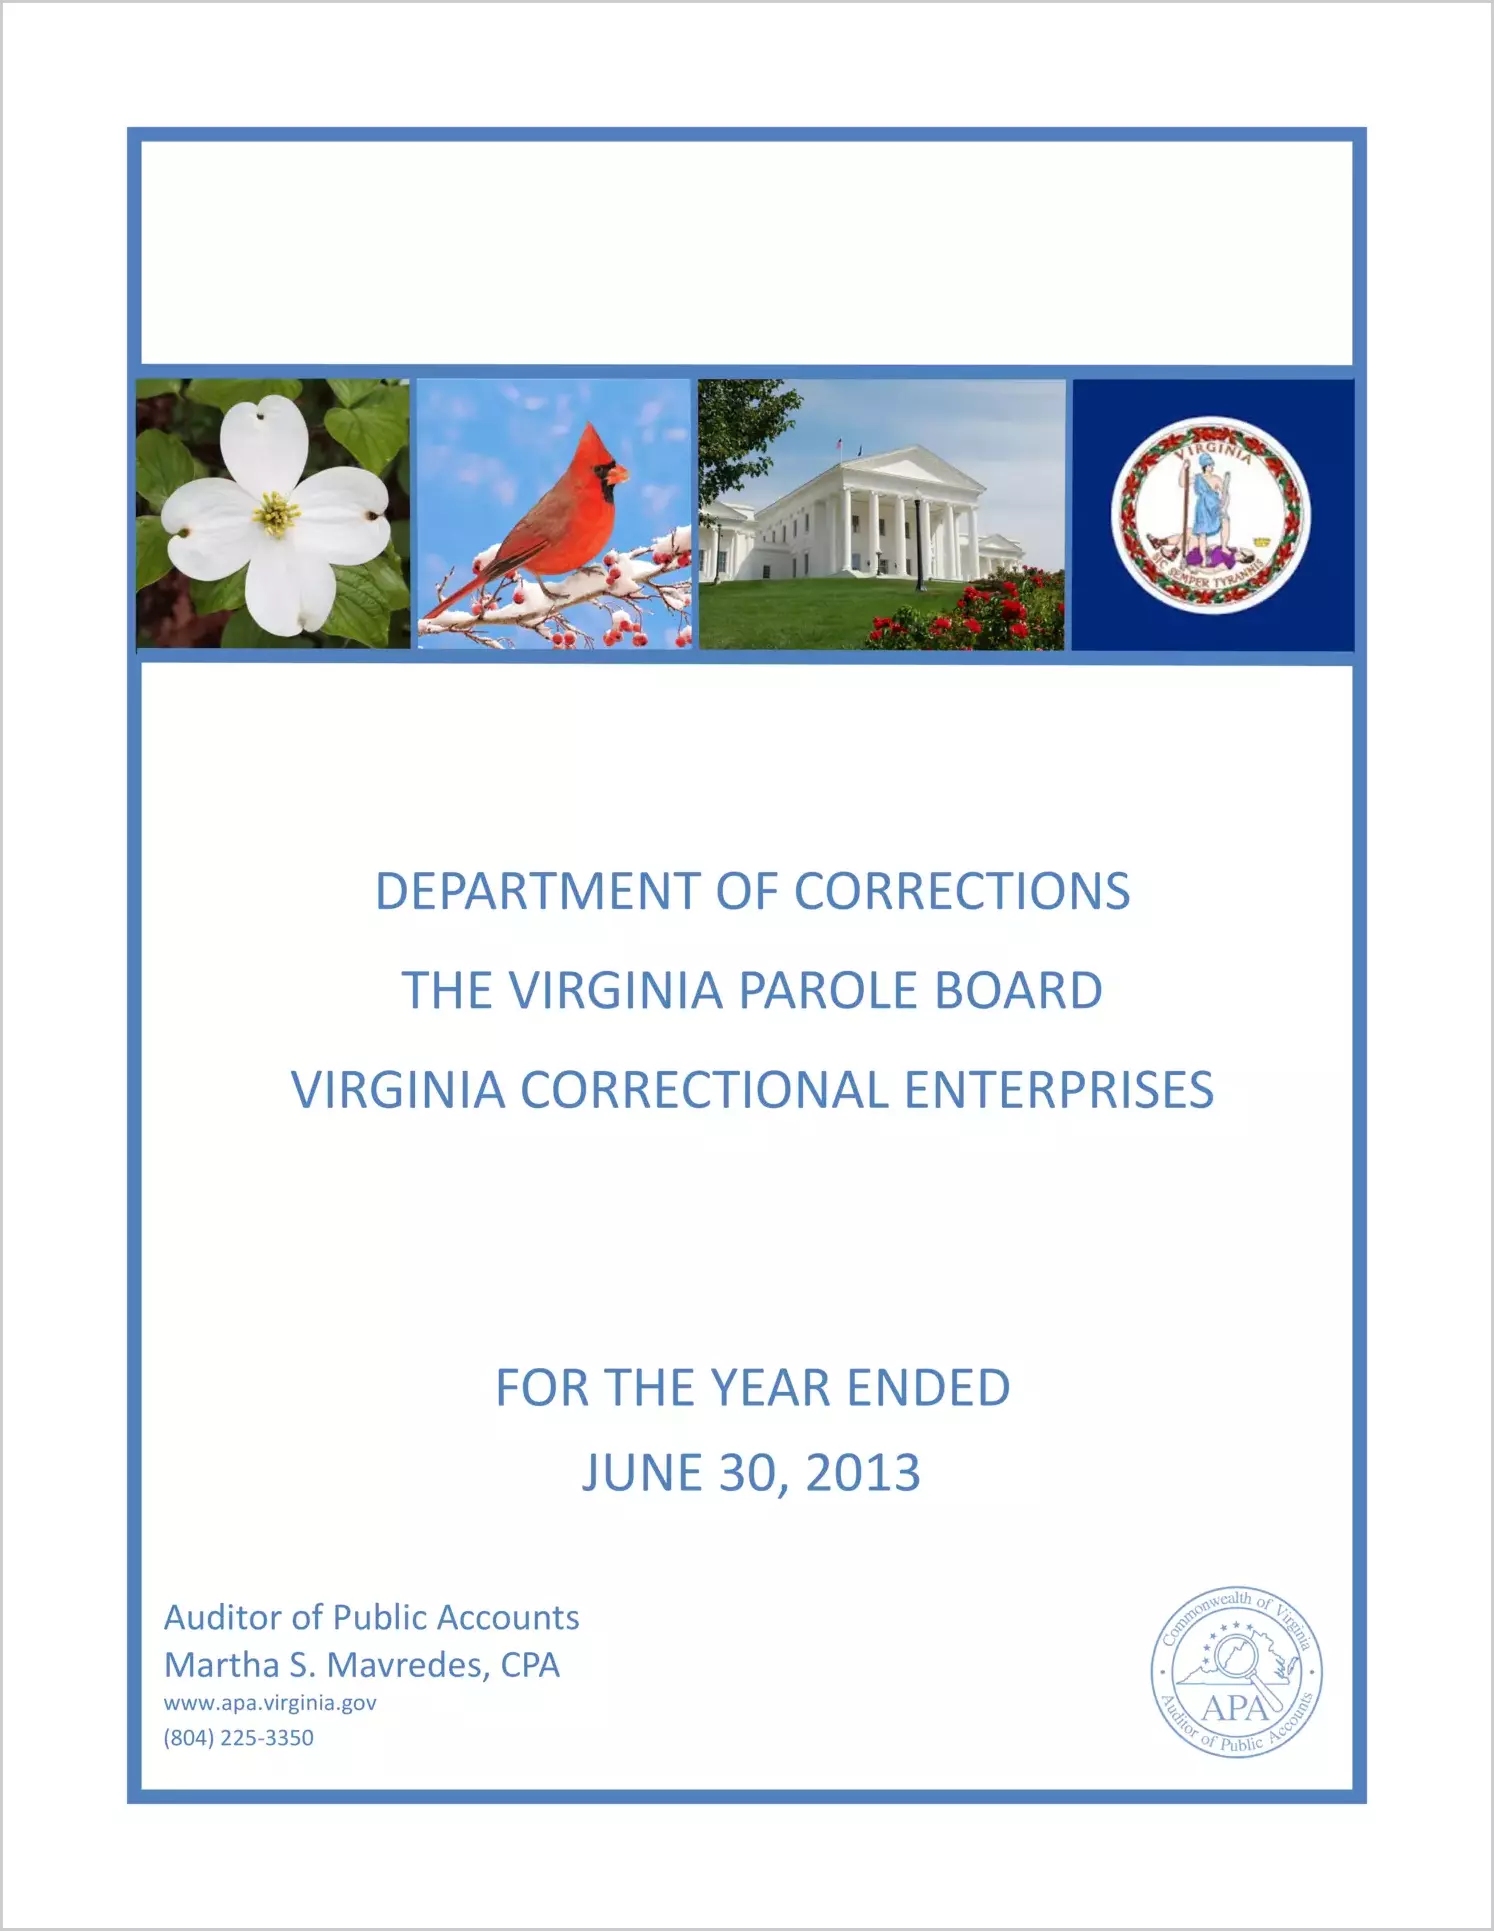 Department of Corrections, Virginia Parole Board and Virginia Correctional Enterprises report on audit for the year ended June 30, 2013